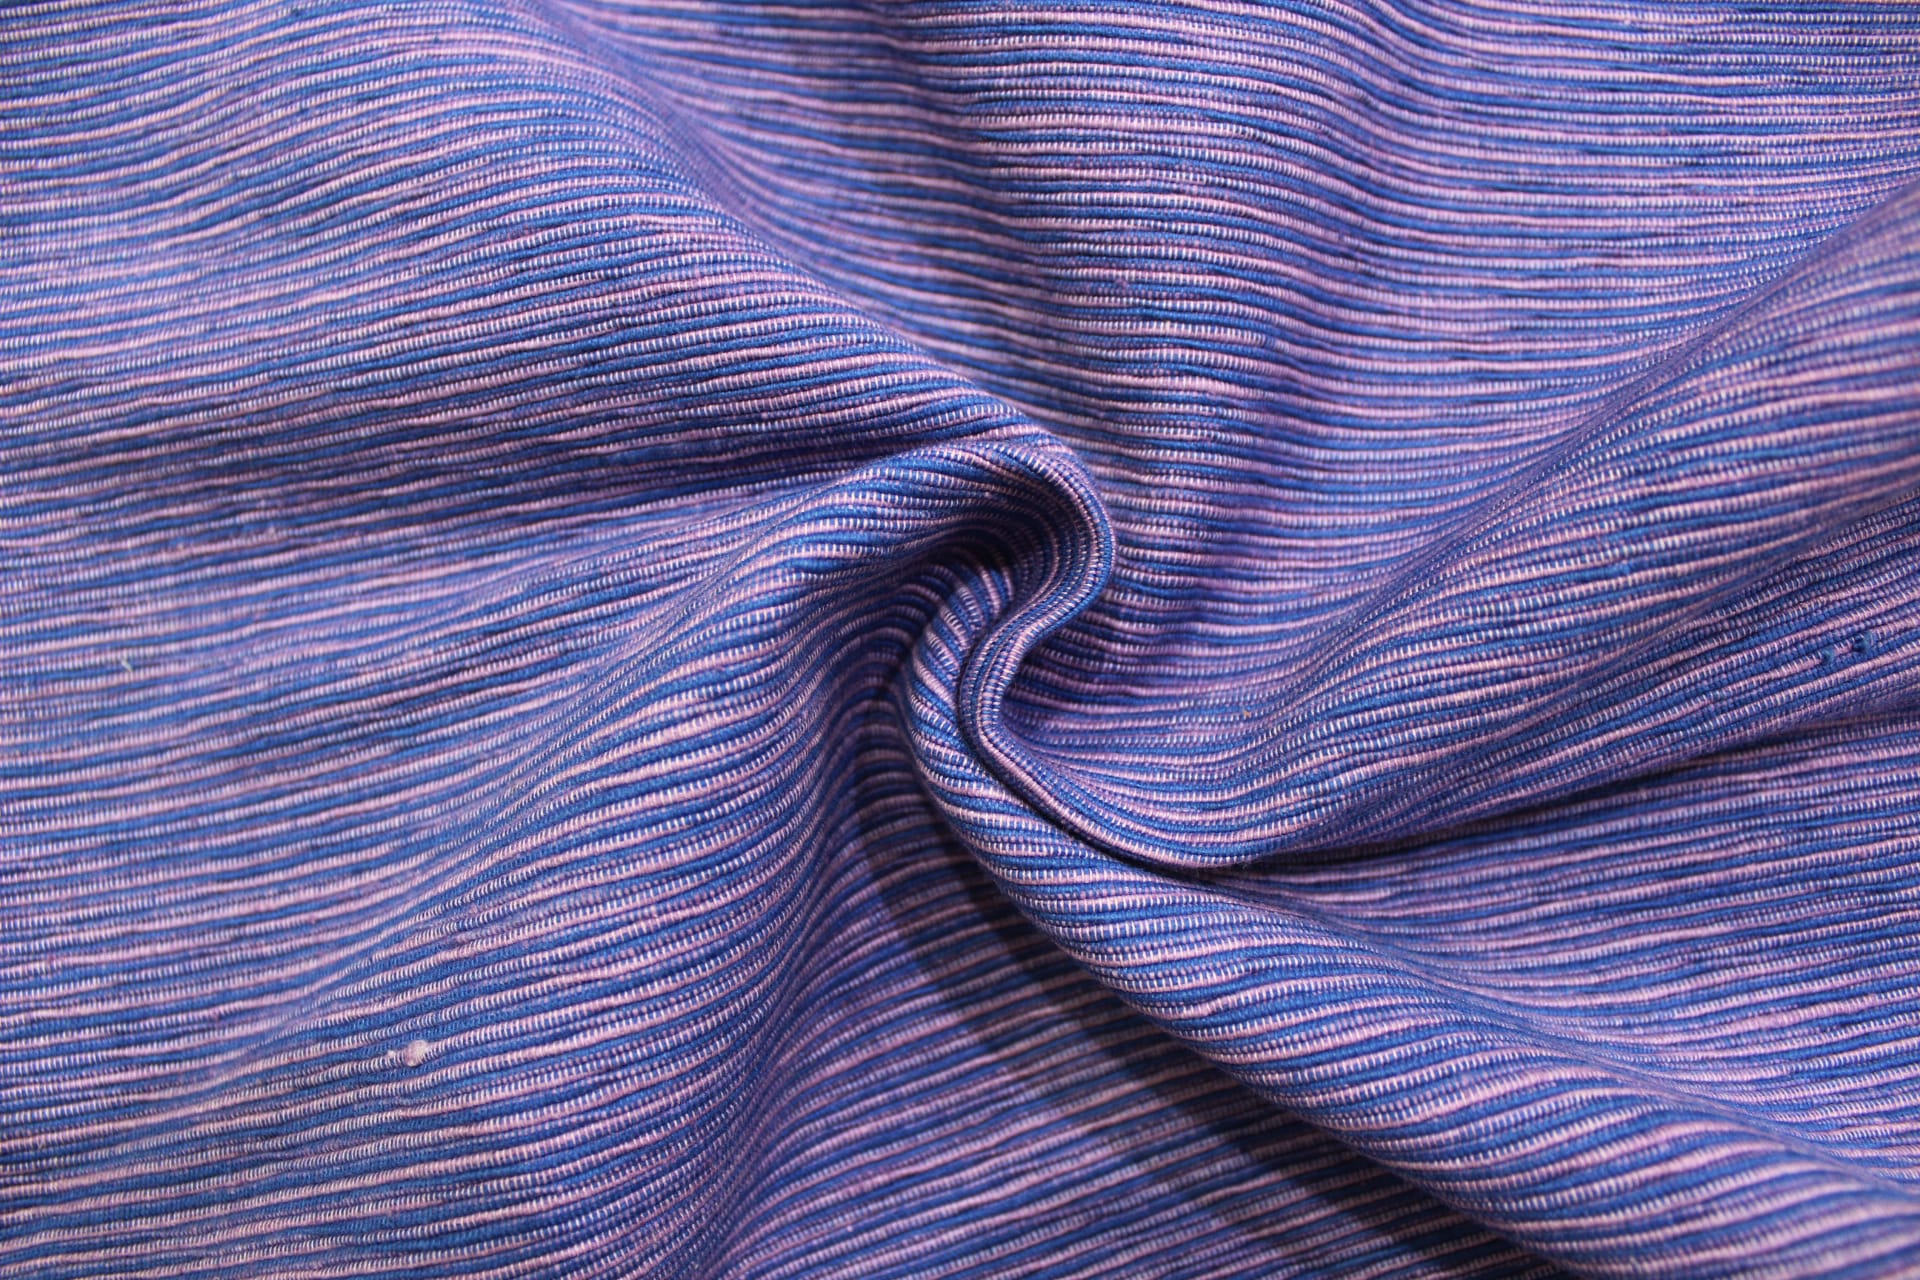 Purple Handloom Corded Weave 385 GSM Plain Cotton Fabric (122 cms) online in India